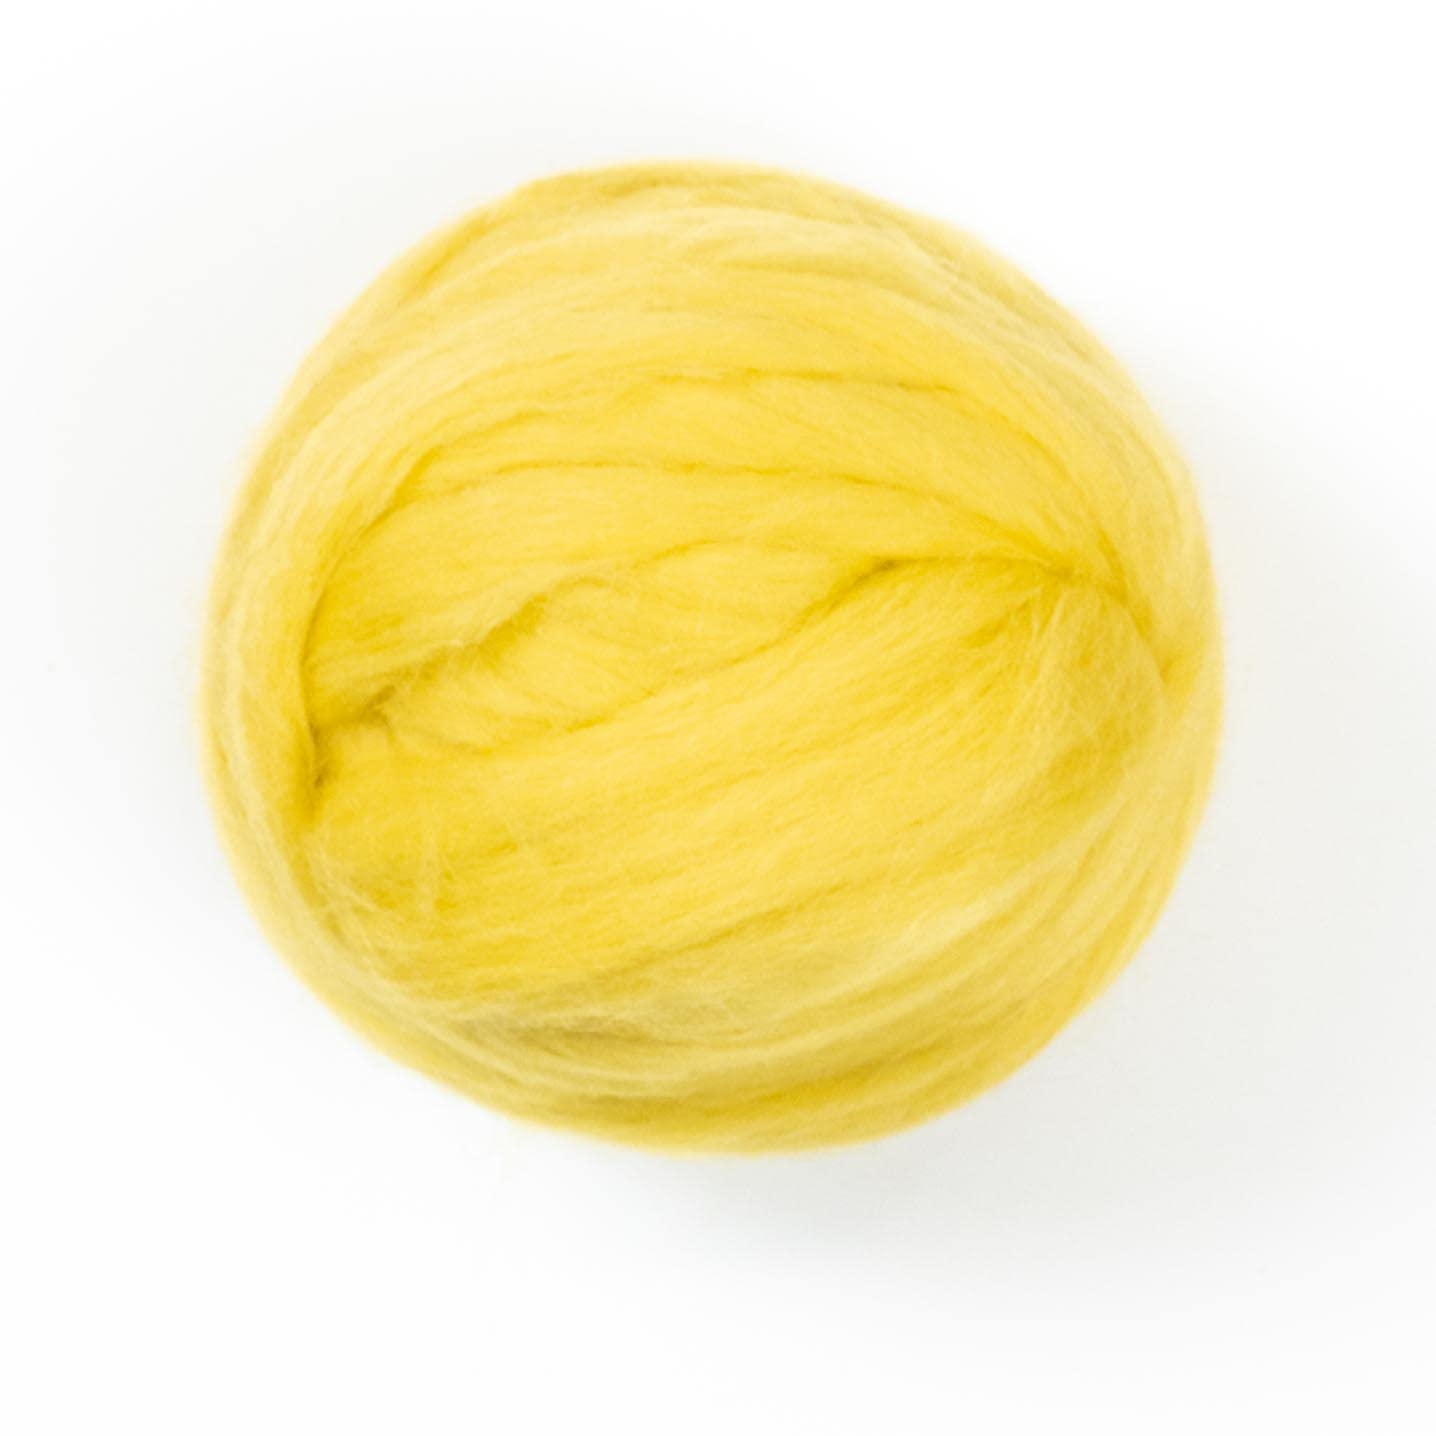 Kondoos Colored Natural Wool roving, 8 OZ. Best Wool for Needle Felting,  Wet Felting, handcrafts and Spinning. (Lemon Yellow)